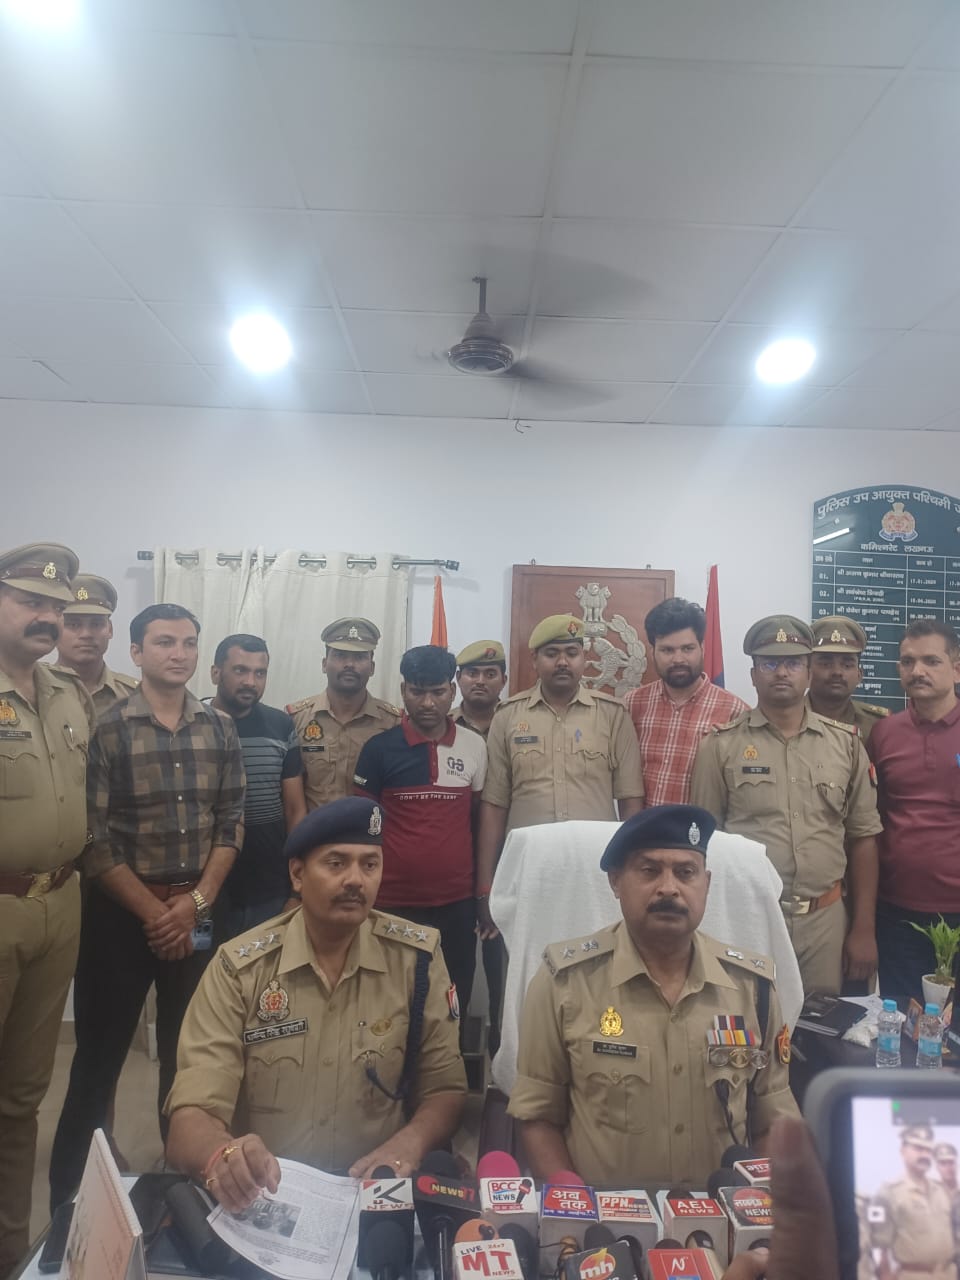 Joint team of Saadatganj Police and Surveillance arrested the robber